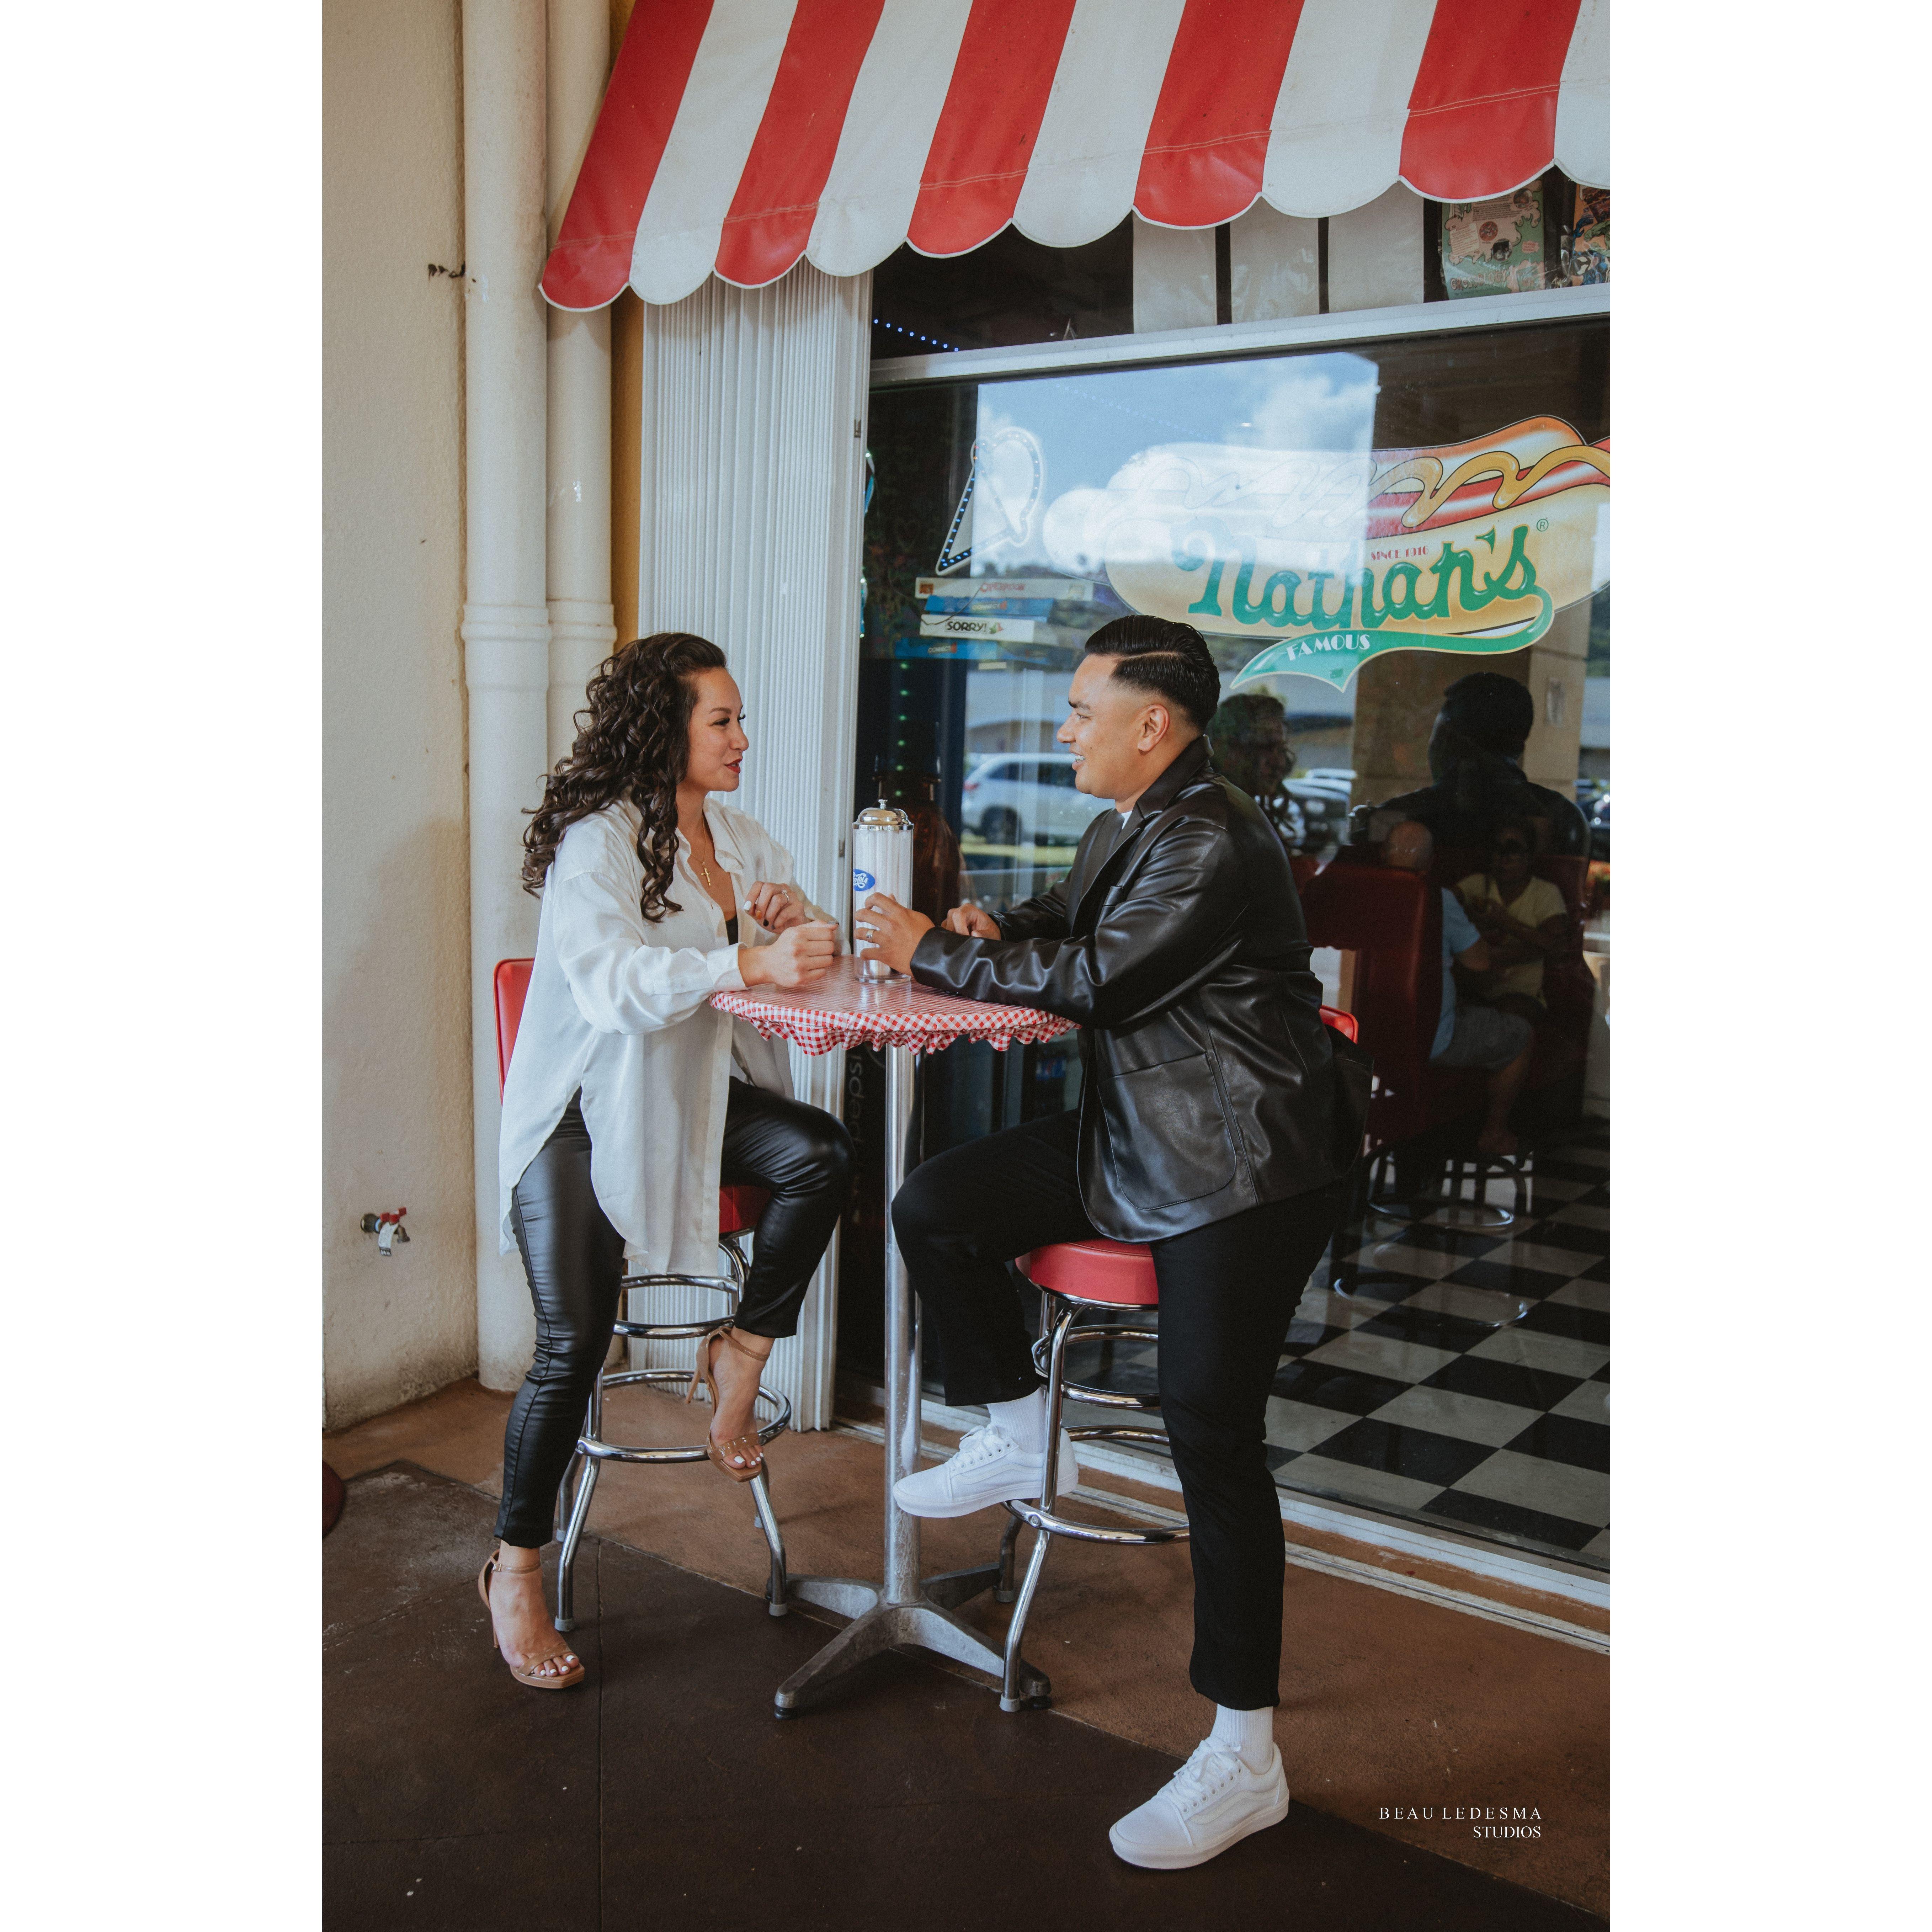 Our Engagement photo shoot. We wanted to be a bit different. So we went with the grease style photo shoot. Our awesome photographer chose Fizz & co. for our first stop of the photo session.